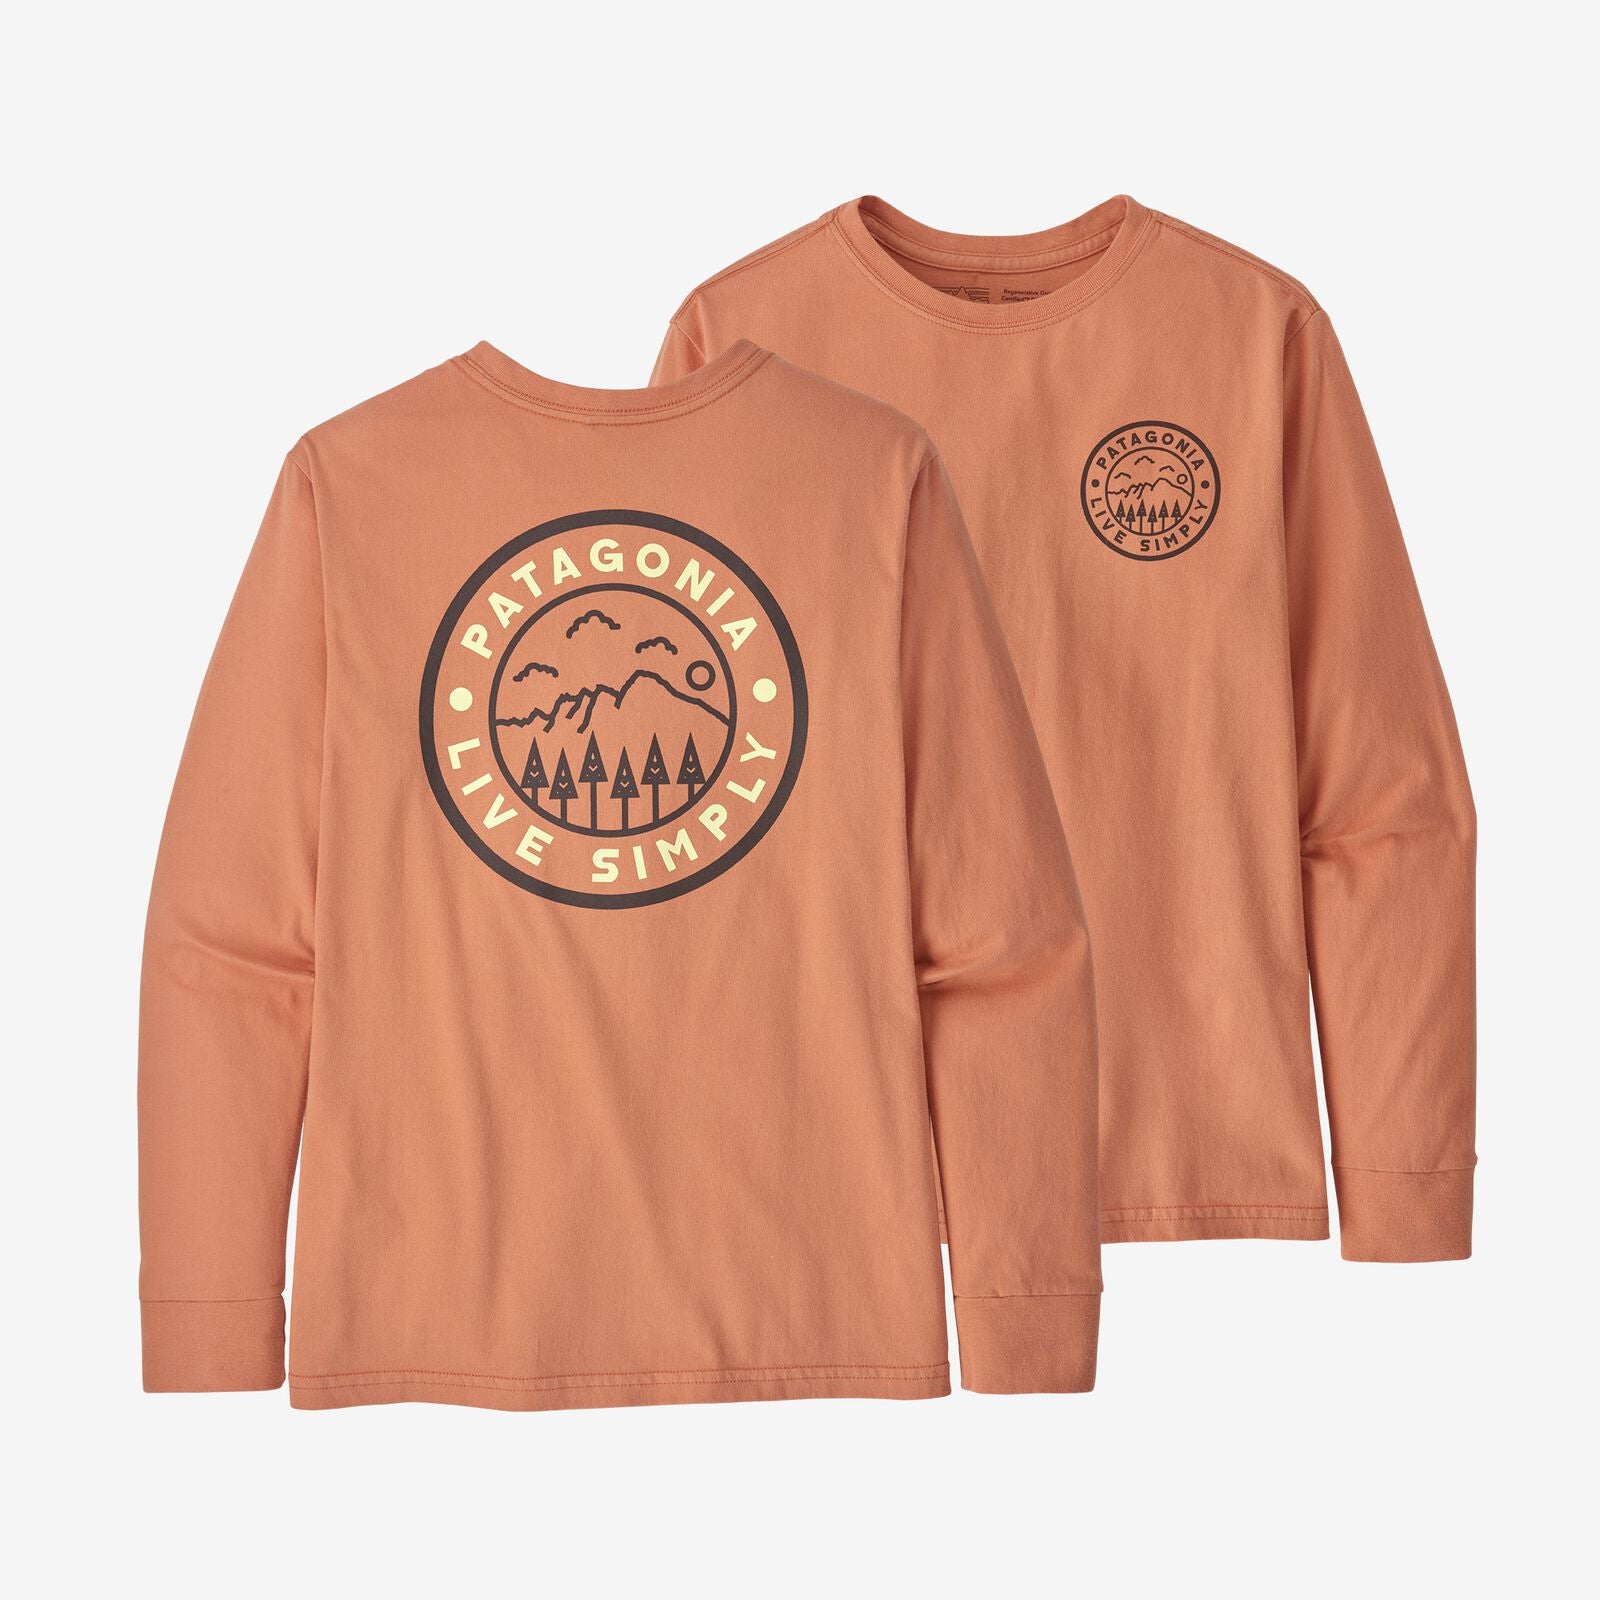 Patagonia - K's L/S Regenerative Organic Certified Cotton T-Shirt Live Simply Crest: Toasted Peach